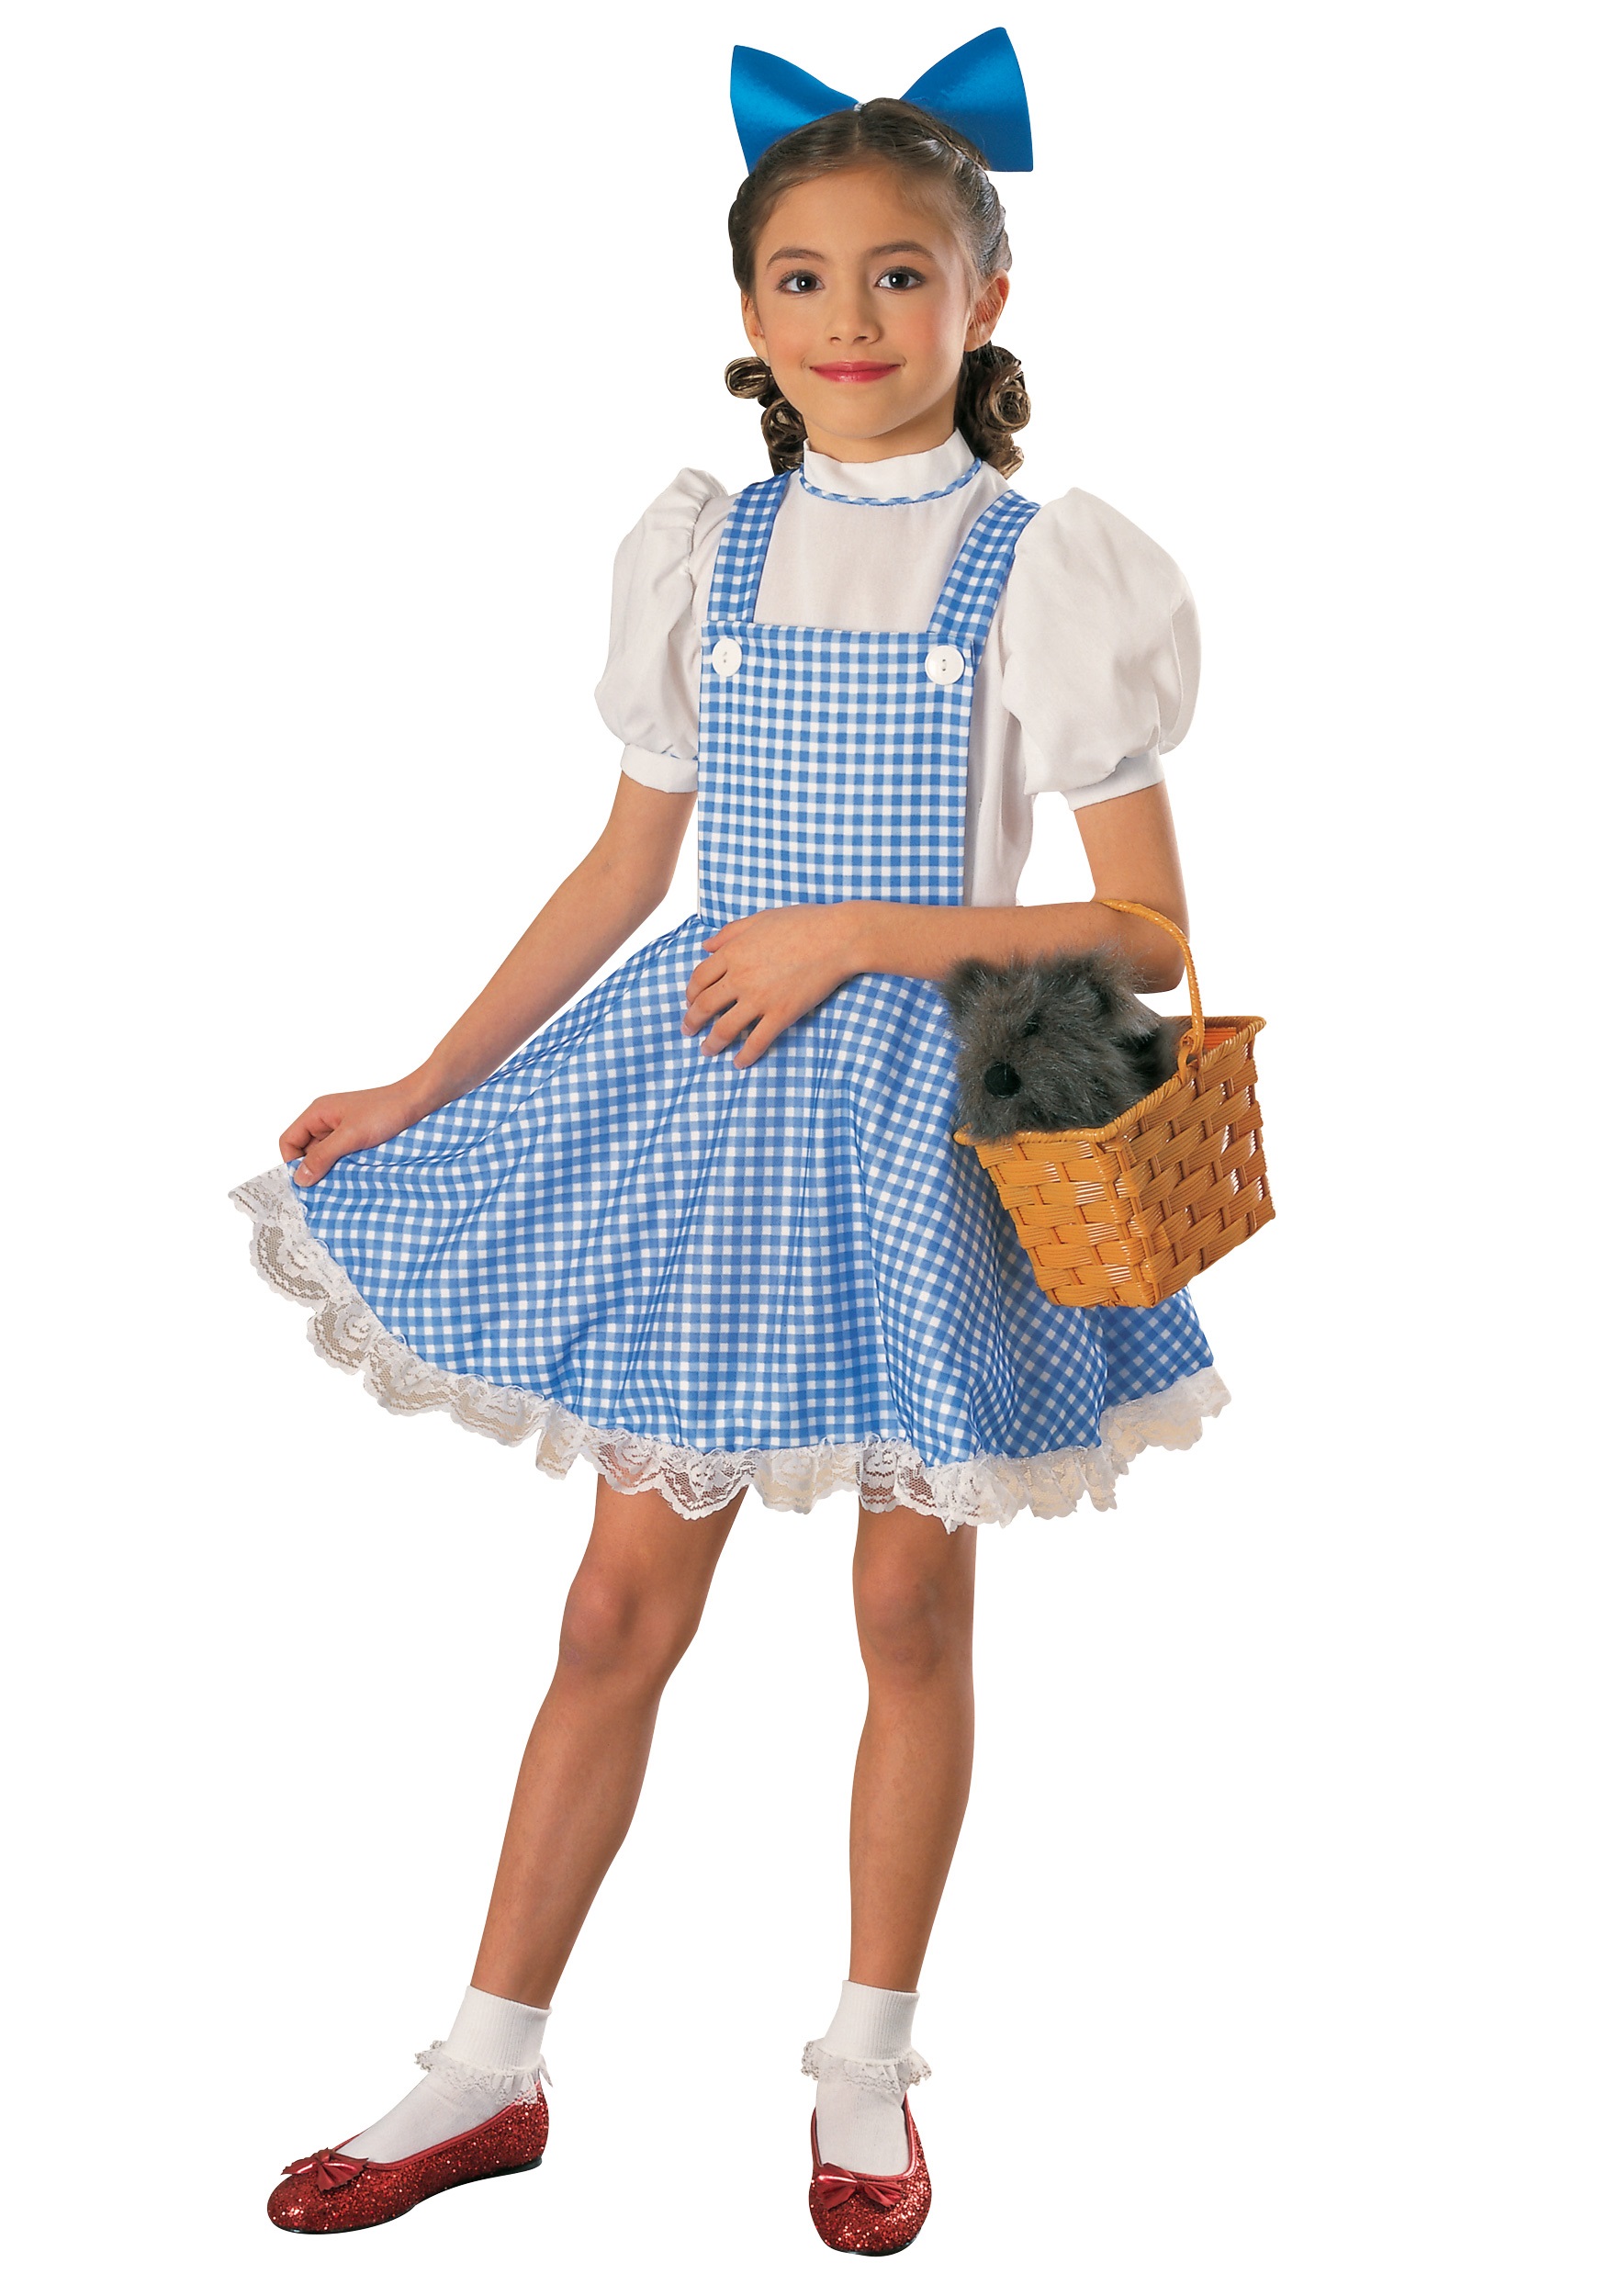 Deluxe Child Dorothy Costume with Free Shipping in U.S., UK, Europe, Canada...